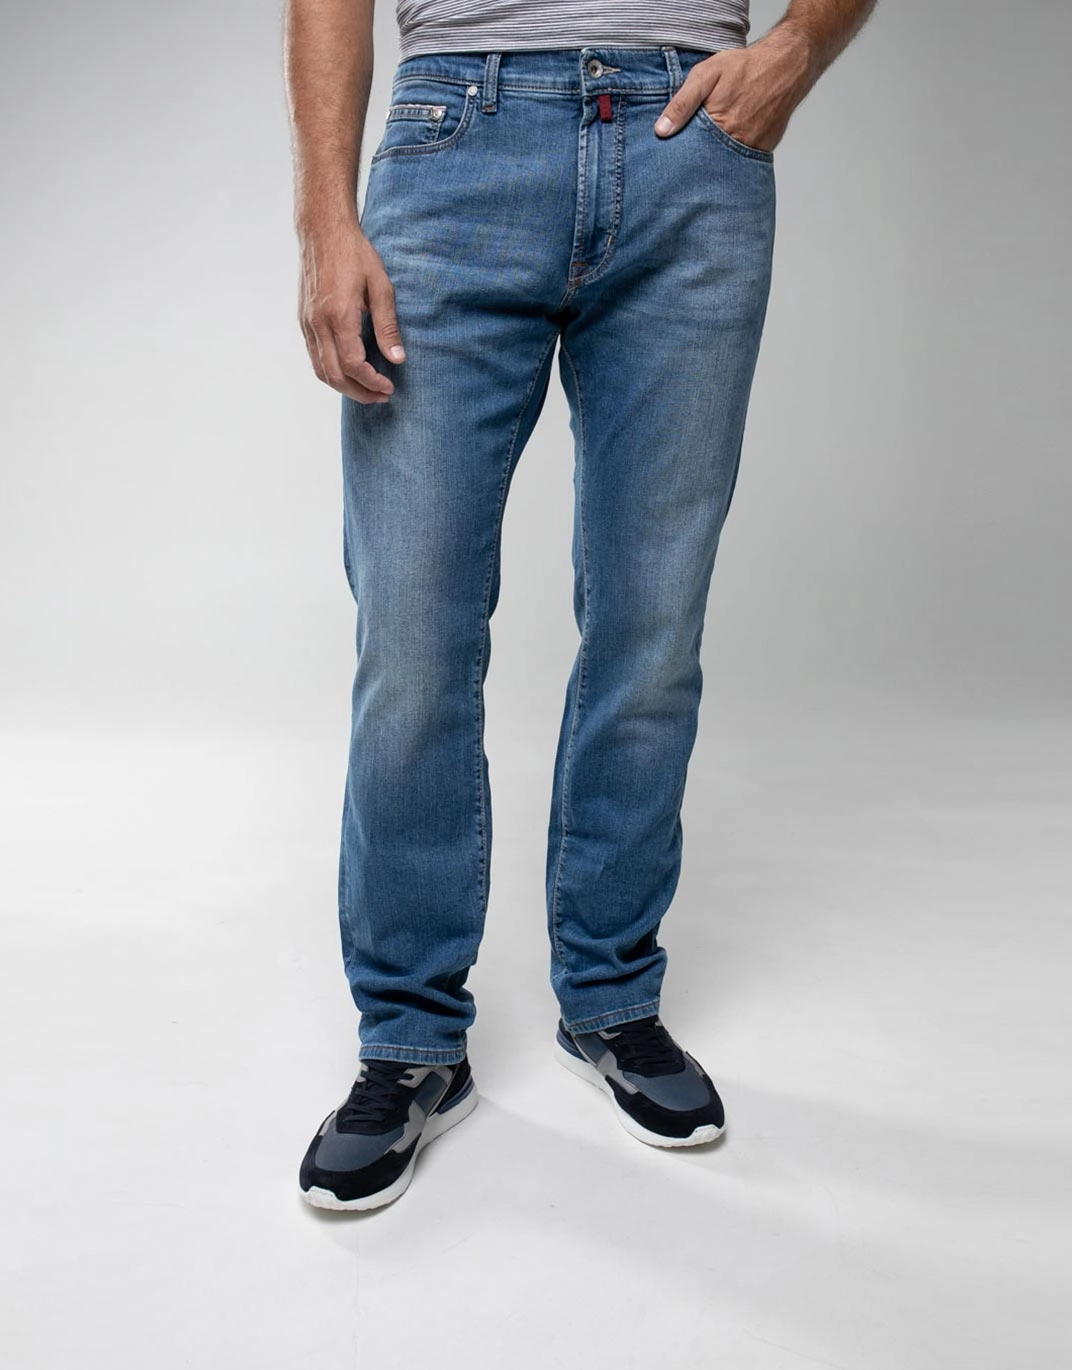 omzeilen Odysseus Snel ⏩Pierre Cardin jeans from the Premium Selvedge collection in blue  7173/07/3178 ᐈ Price 2153 UAH ᐈ Buy in the online store Pierre Cardin